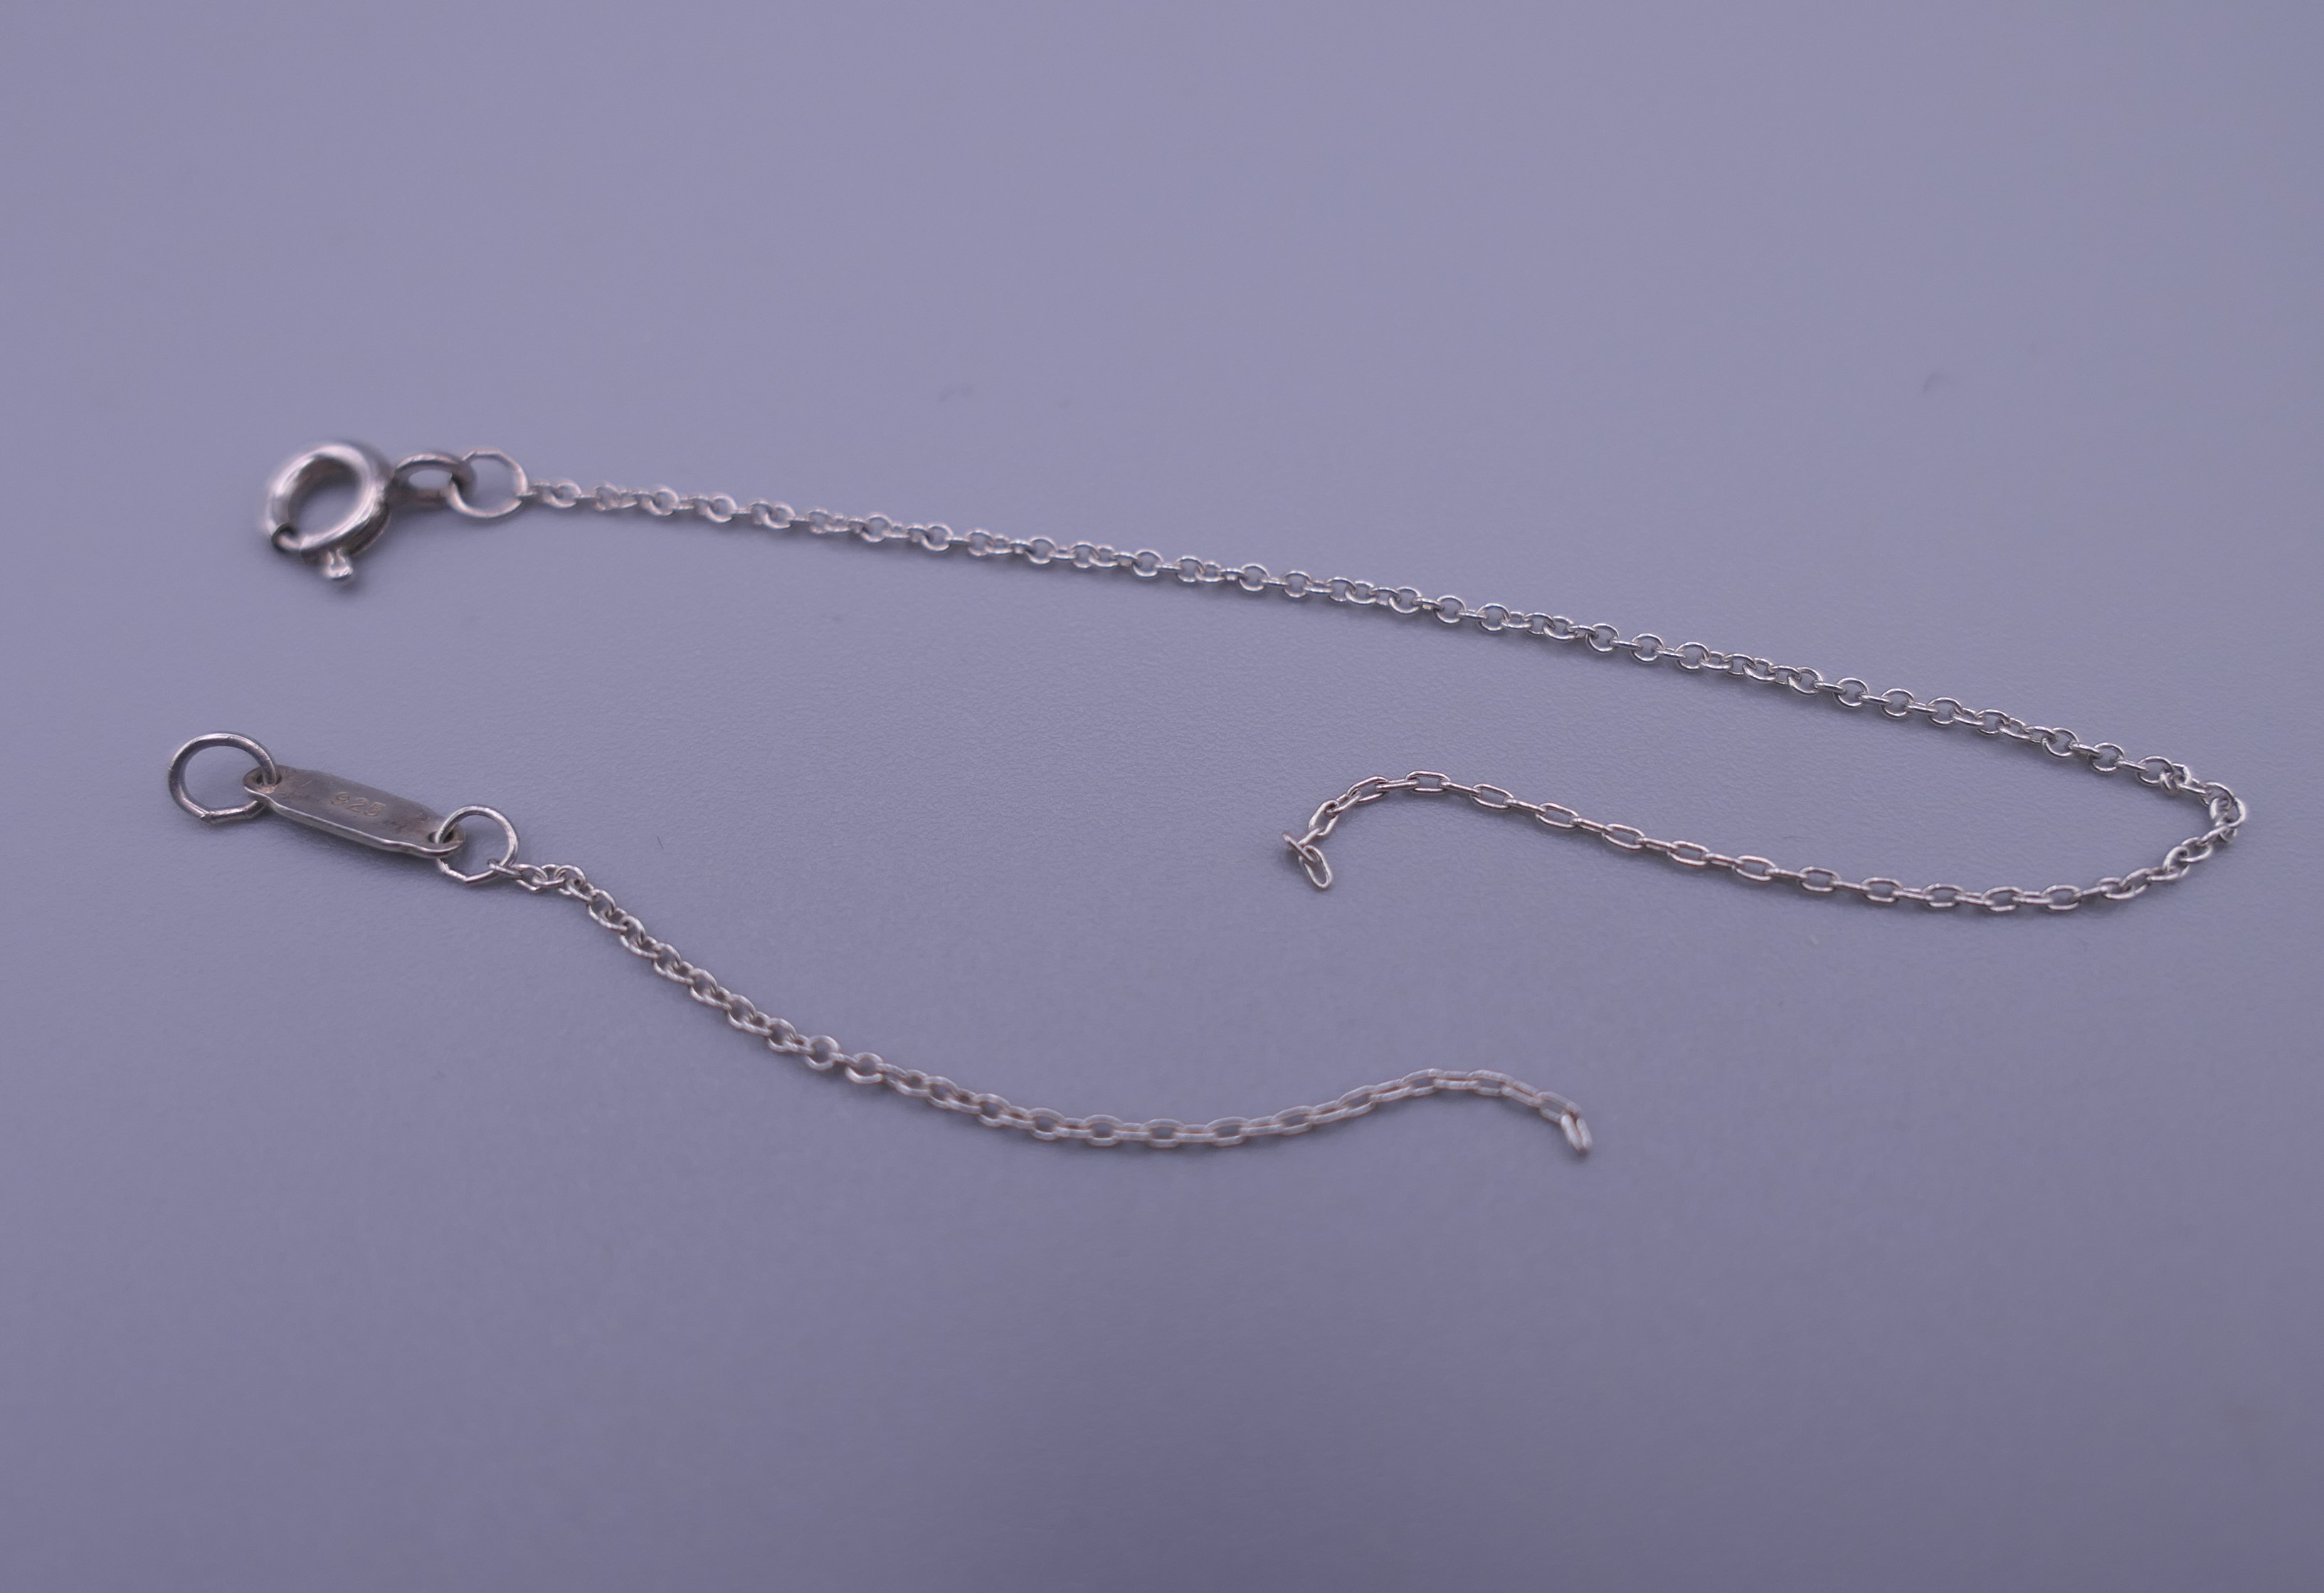 A Tiffany silver key pendant and chain, and a pair of earrings. Pendant 3 cm long. - Image 7 of 8